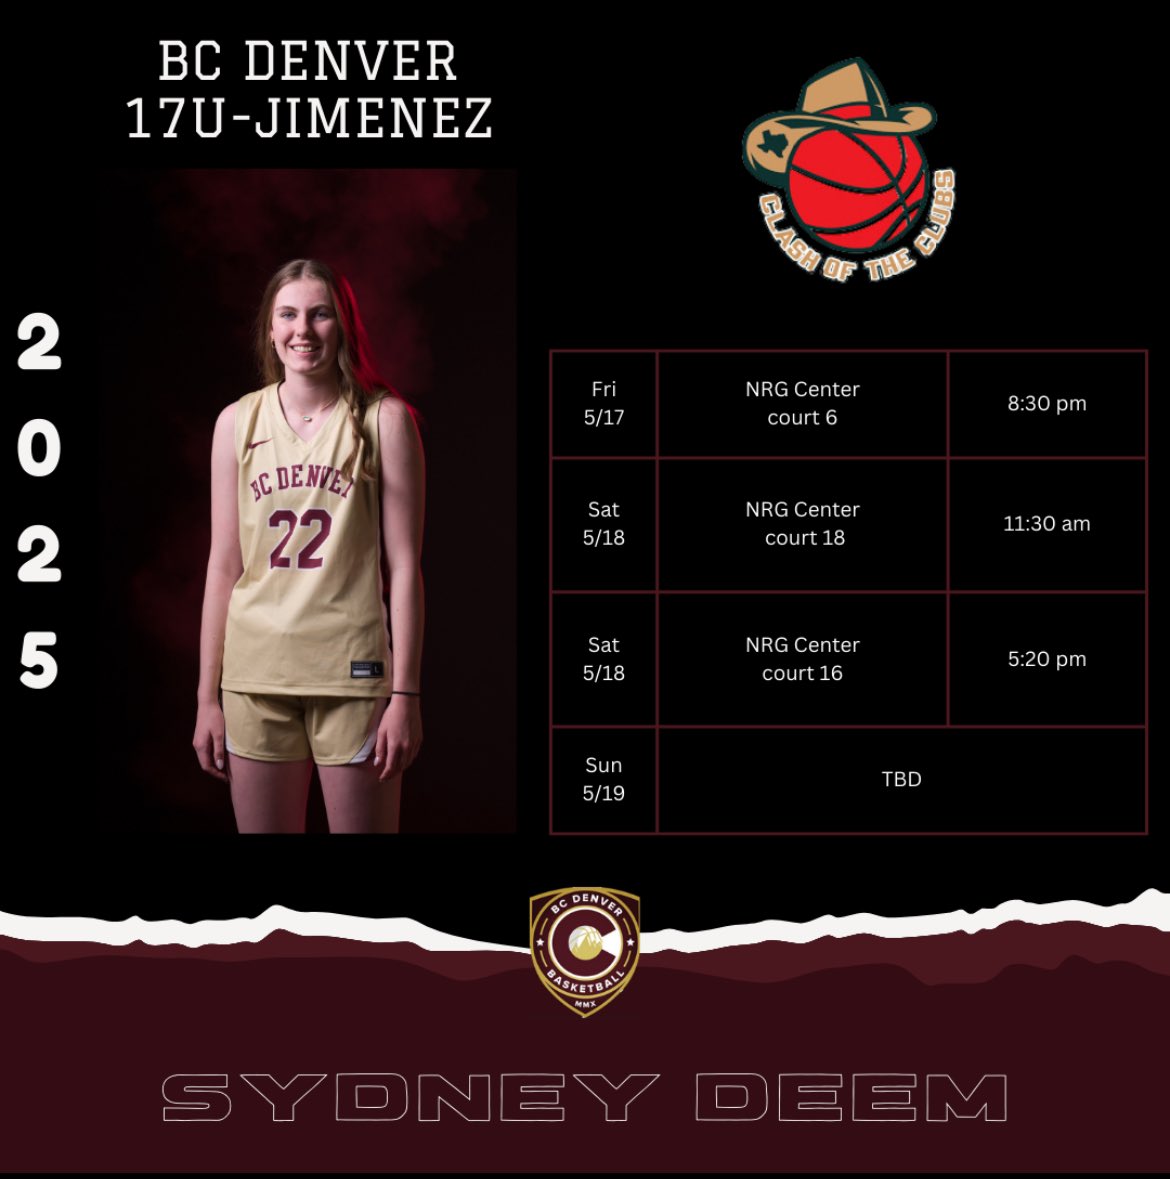 Ready for this weekend! Can’t wait to compete! @BCDenver_WBB